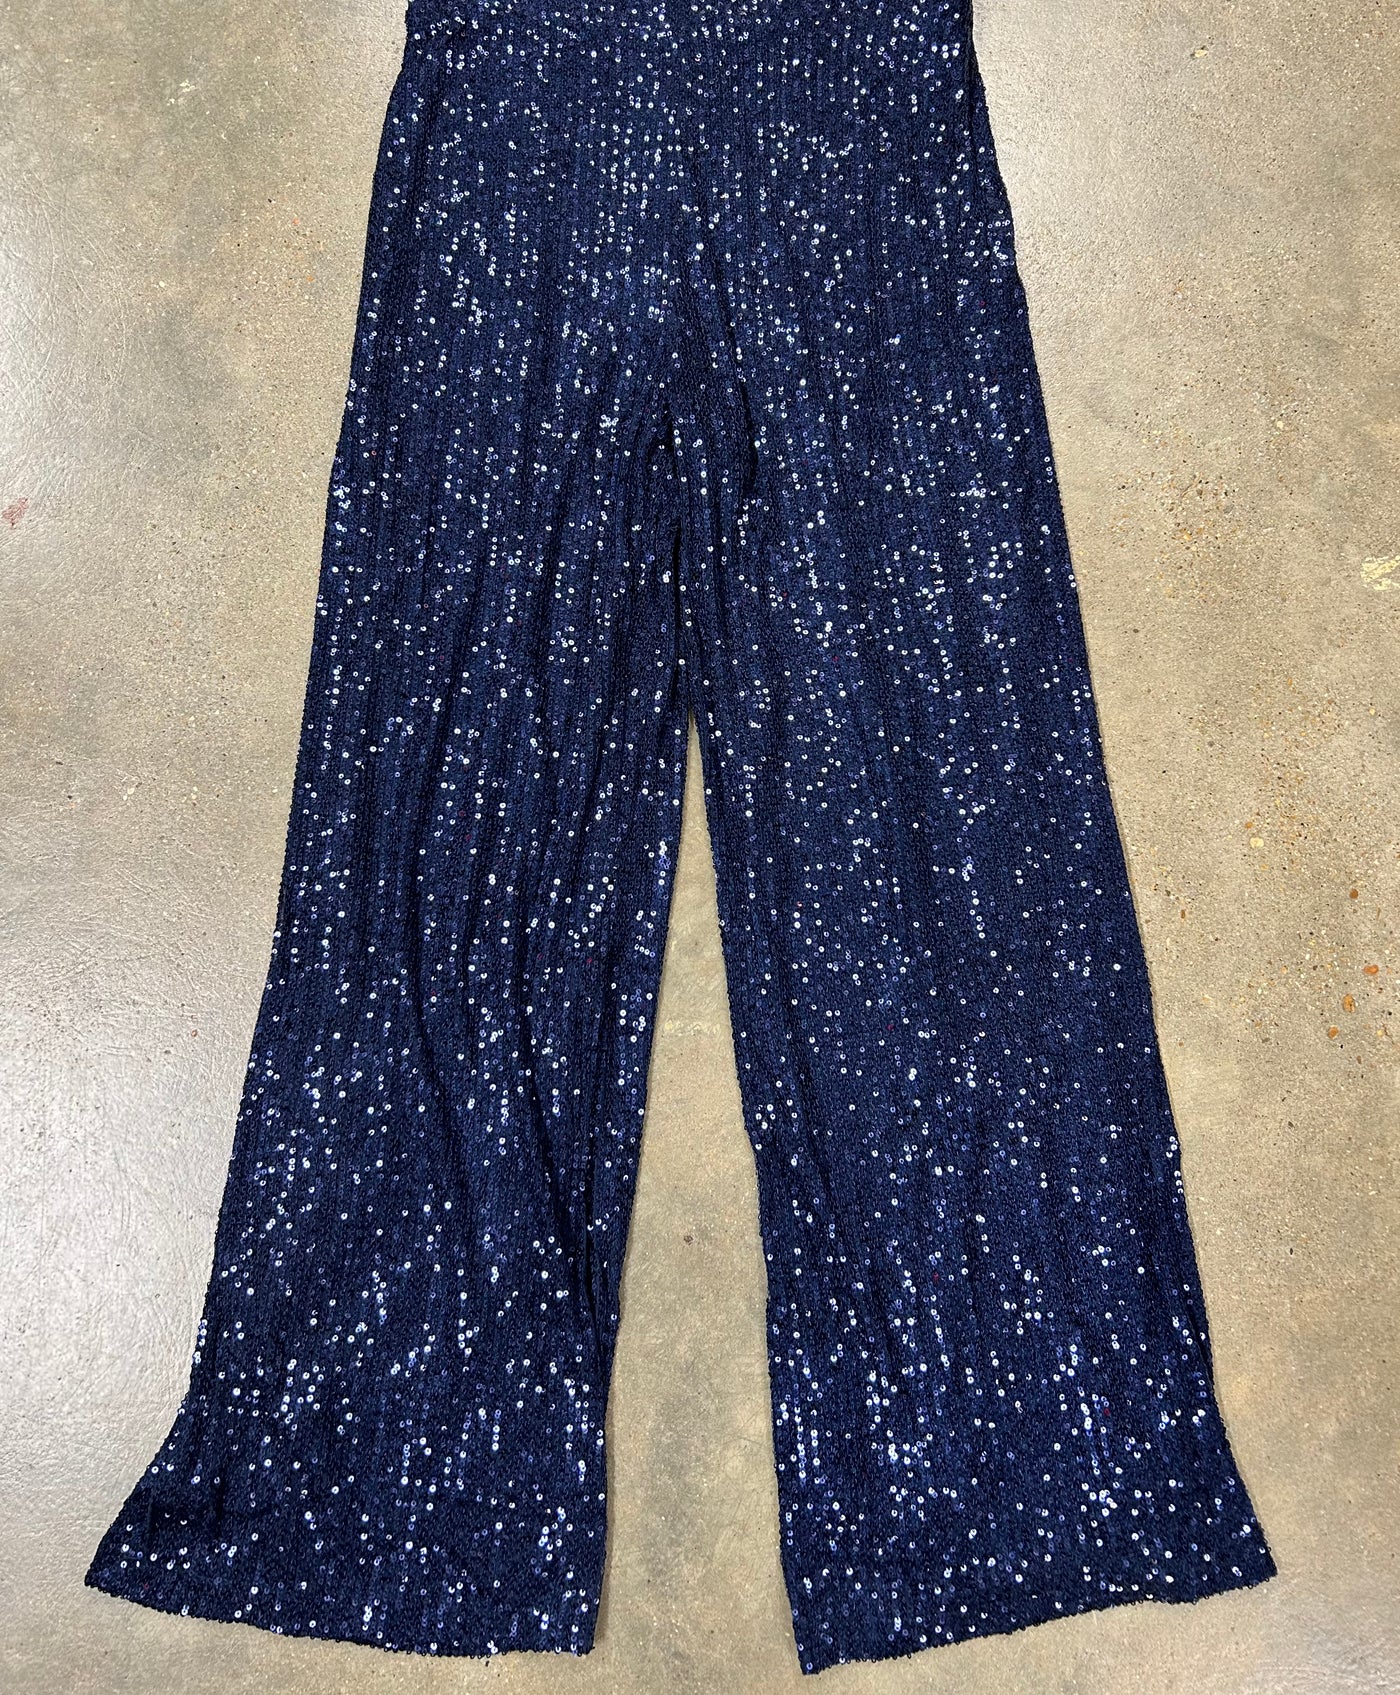 Call Me What You Want Sequin Pants